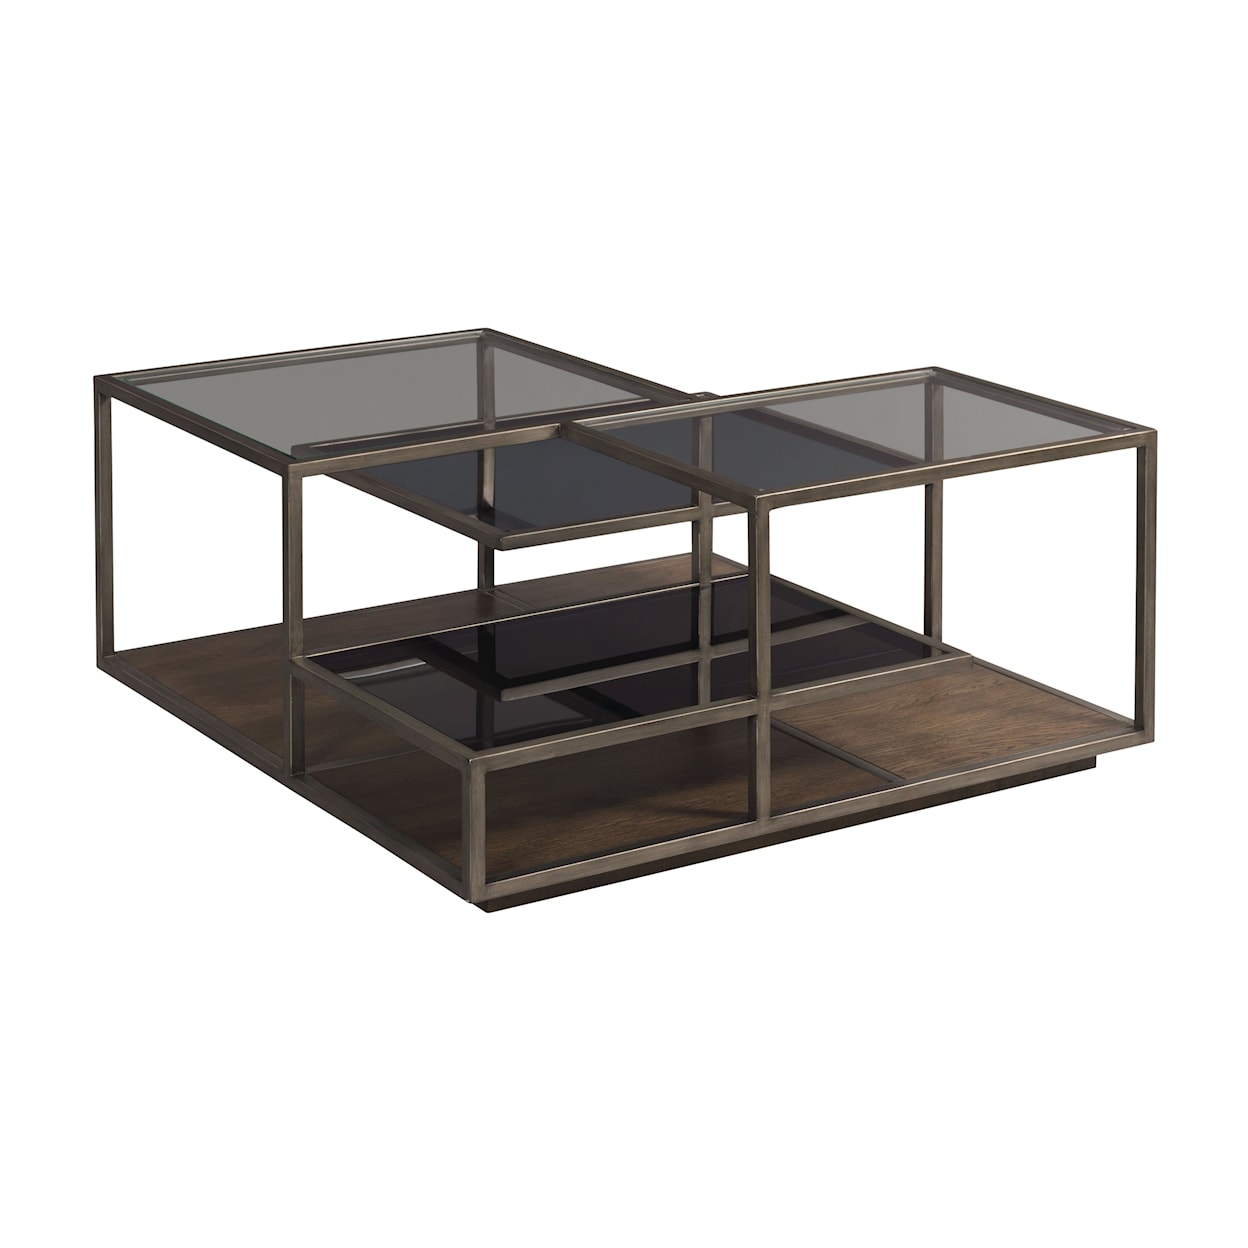 Hammary Cleo Square Coffee Table